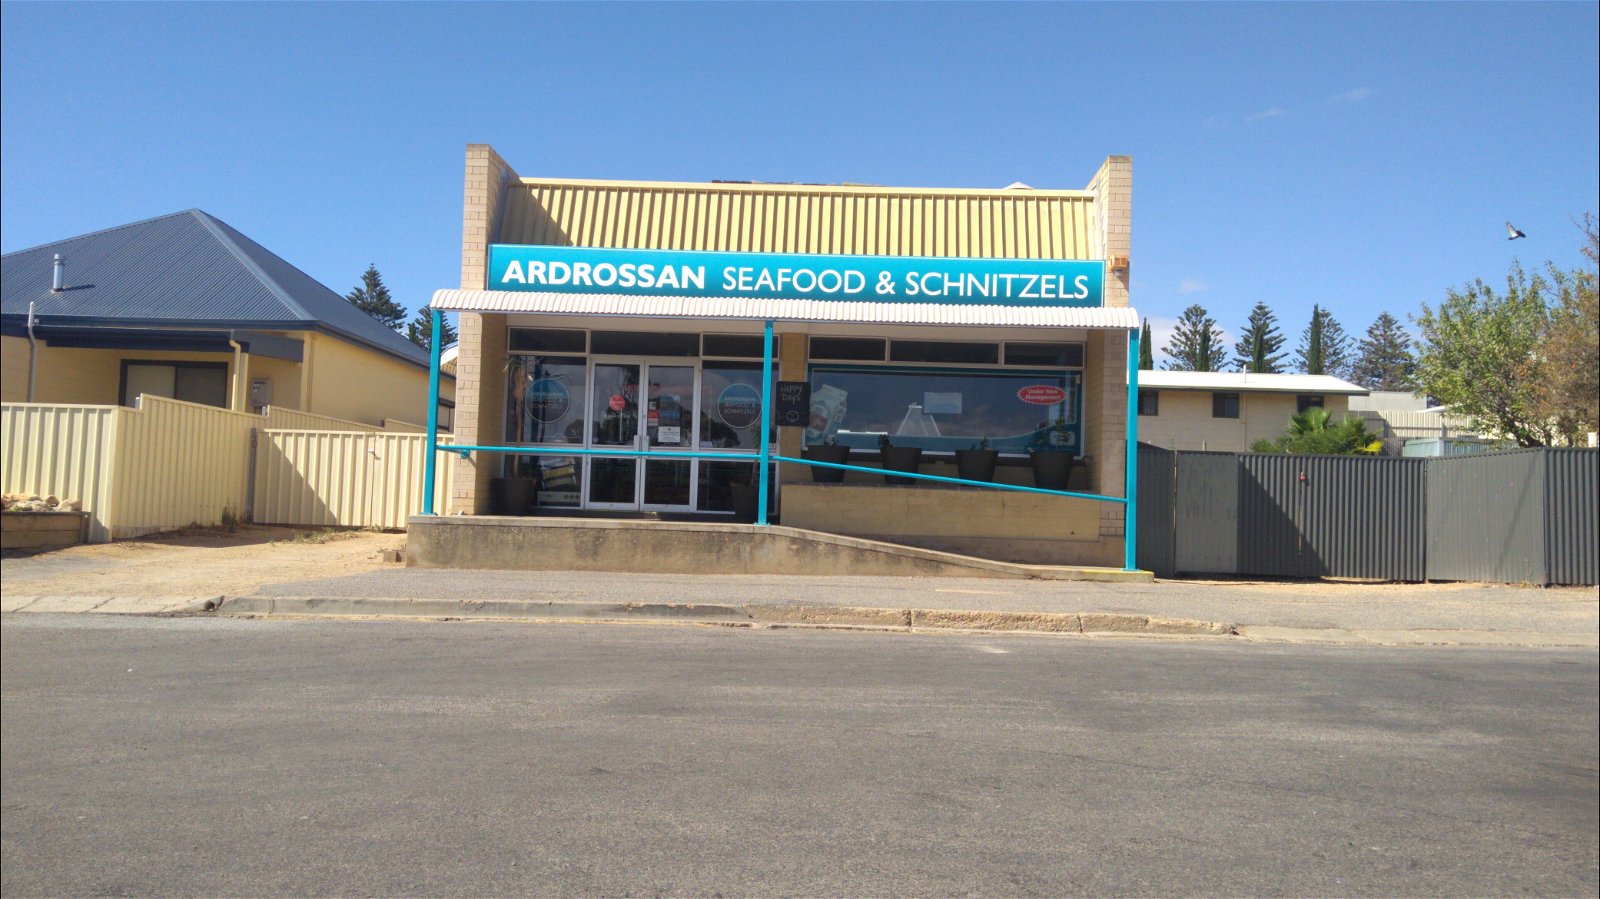 Ardrossan Seafood and Schnitzels